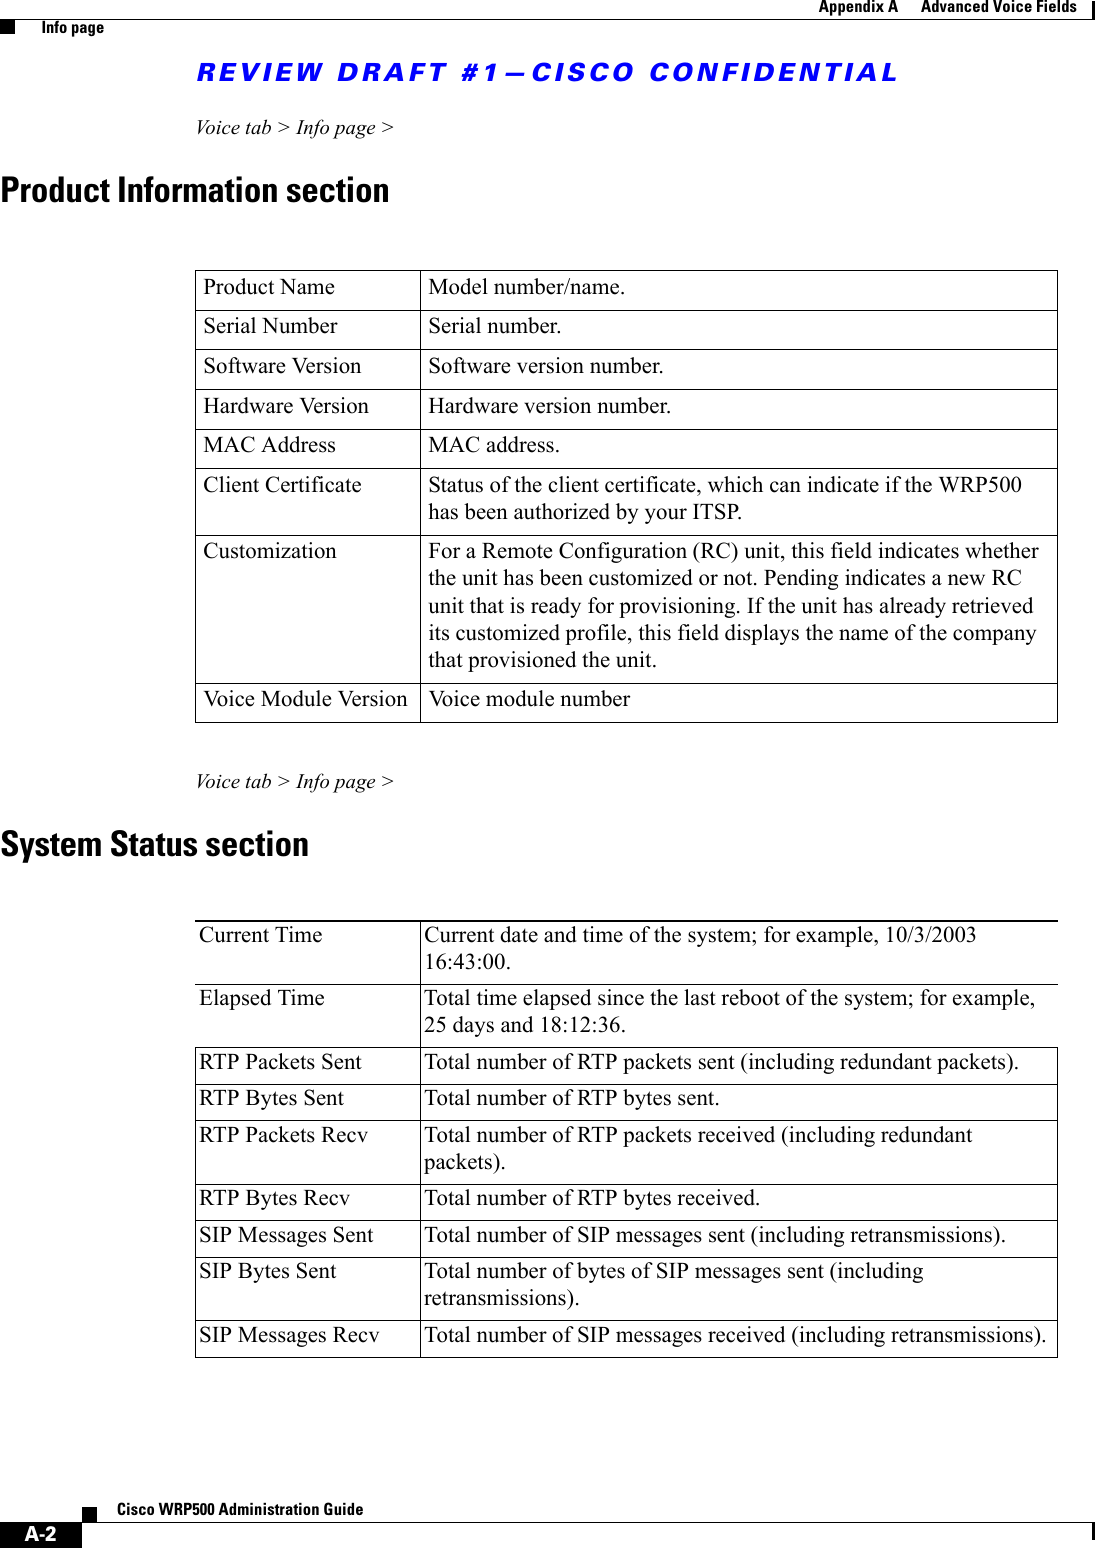 REVIEW DRAFT #1—CISCO CONFIDENTIALA-2Cisco WRP500 Administration Guide Appendix A      Advanced Voice Fields  Info pageVoice tab &gt; Info page &gt;Product Information sectionVoice tab &gt; Info page &gt;System Status sectionProduct Name Model number/name.Serial Number Serial number. Software Version Software version number.Hardware Version Hardware version number.MAC Address MAC address.Client Certificate Status of the client certificate, which can indicate if the WRP500 has been authorized by your ITSP.Customization For a Remote Configuration (RC) unit, this field indicates whether the unit has been customized or not. Pending indicates a new RC unit that is ready for provisioning. If the unit has already retrieved its customized profile, this field displays the name of the company that provisioned the unit. Voice Module Version Voice module numberCurrent Time Current date and time of the system; for example, 10/3/2003 16:43:00.Elapsed Time Total time elapsed since the last reboot of the system; for example, 25 days and 18:12:36.RTP Packets Sent Total number of RTP packets sent (including redundant packets).RTP Bytes Sent Total number of RTP bytes sent.RTP Packets Recv Total number of RTP packets received (including redundant packets).RTP Bytes Recv Total number of RTP bytes received.SIP Messages Sent Total number of SIP messages sent (including retransmissions).SIP Bytes Sent Total number of bytes of SIP messages sent (including retransmissions).SIP Messages Recv Total number of SIP messages received (including retransmissions).